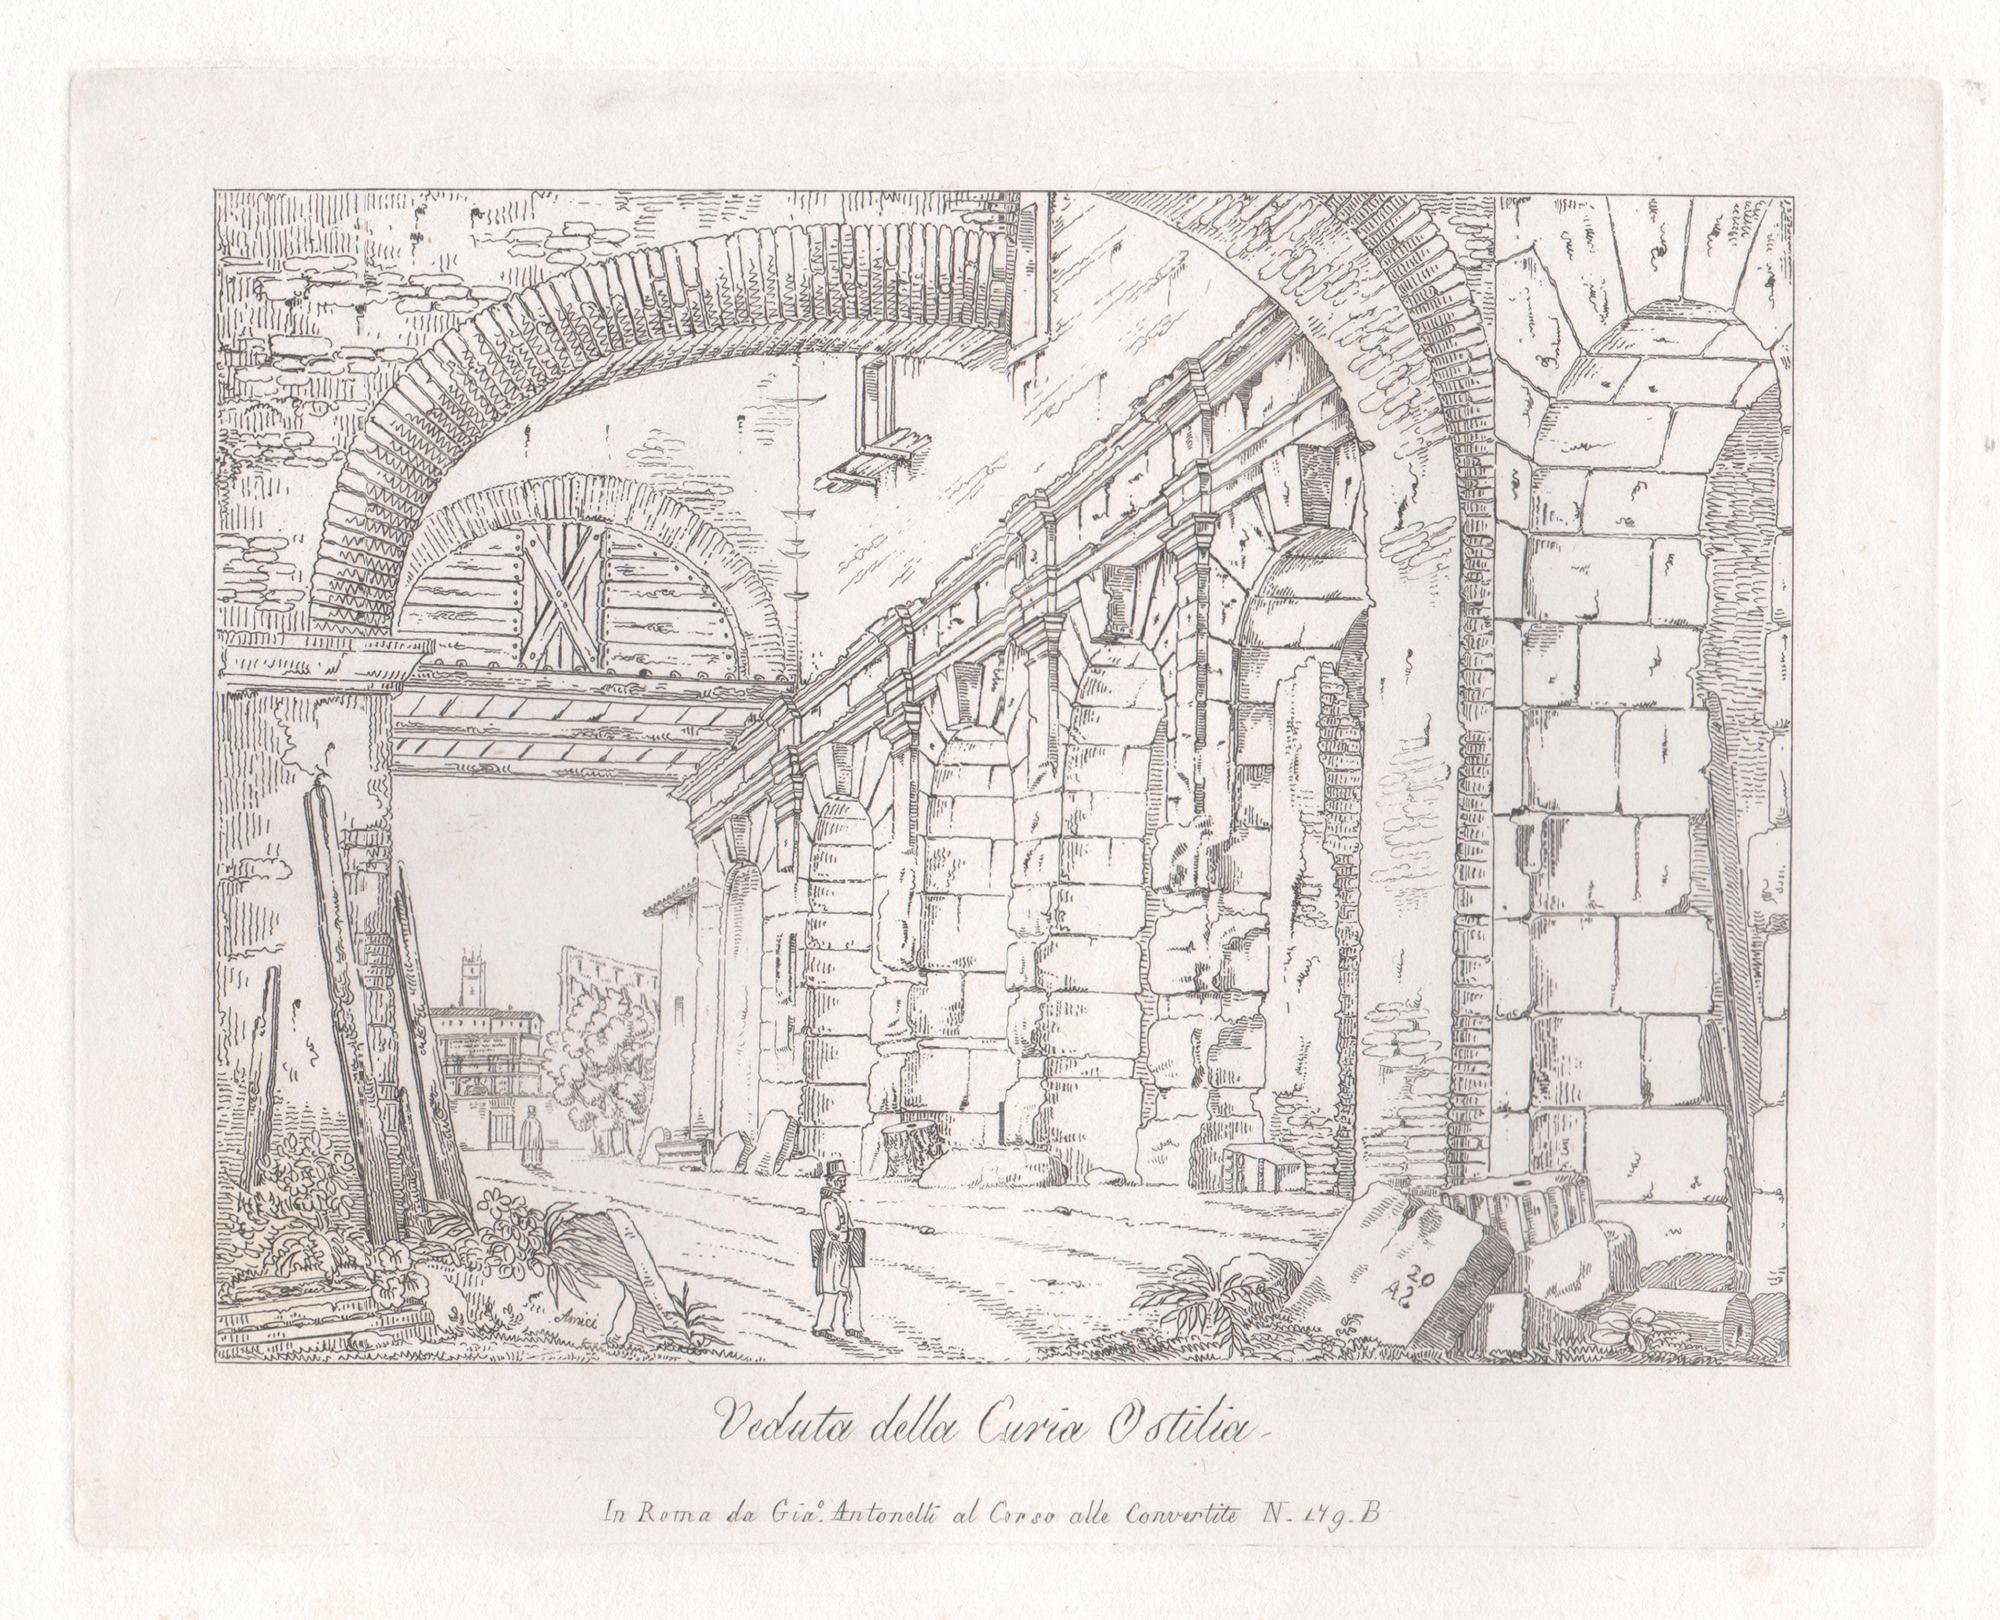 View of the Curia Hostilia, Rome, Italy. Early 19th century etching.